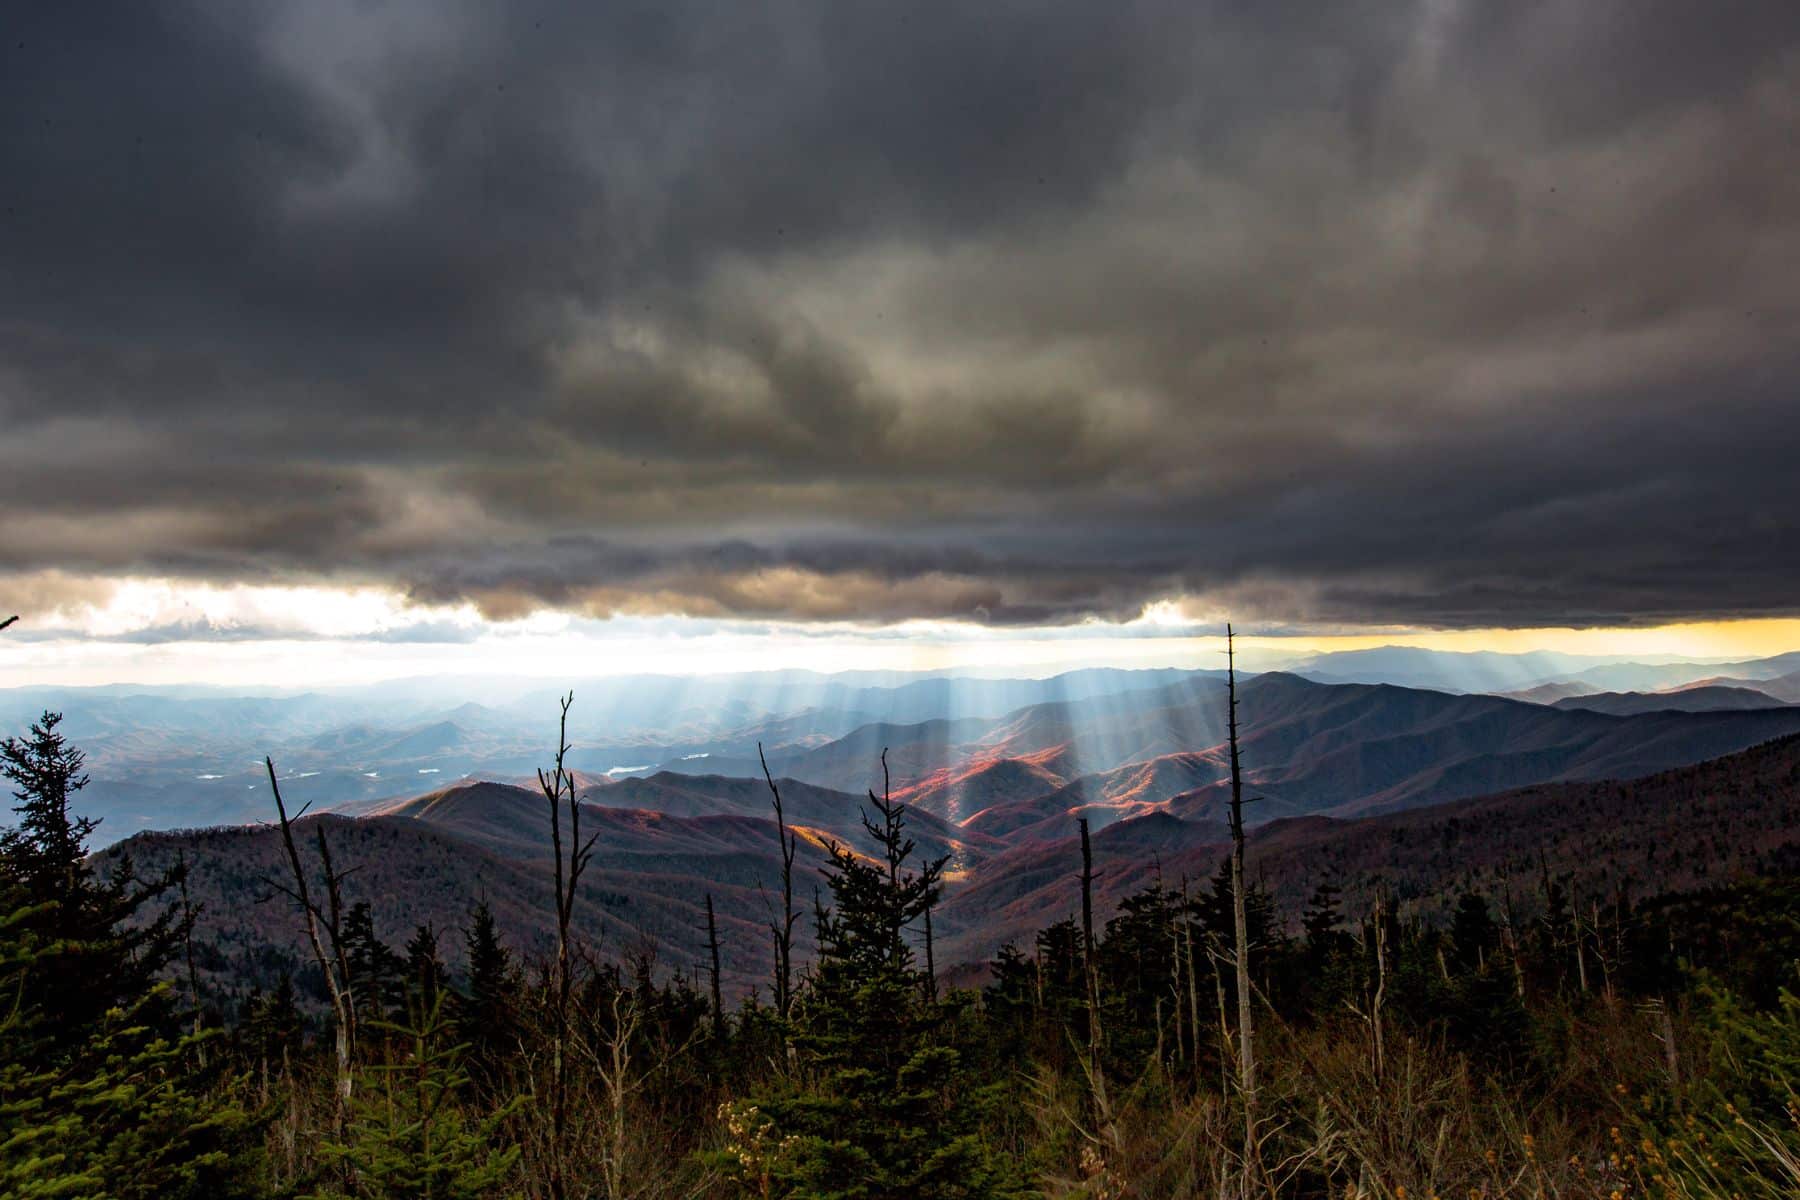 Dark clouds over the Smoky Mountains as seen from Clingmans Dome